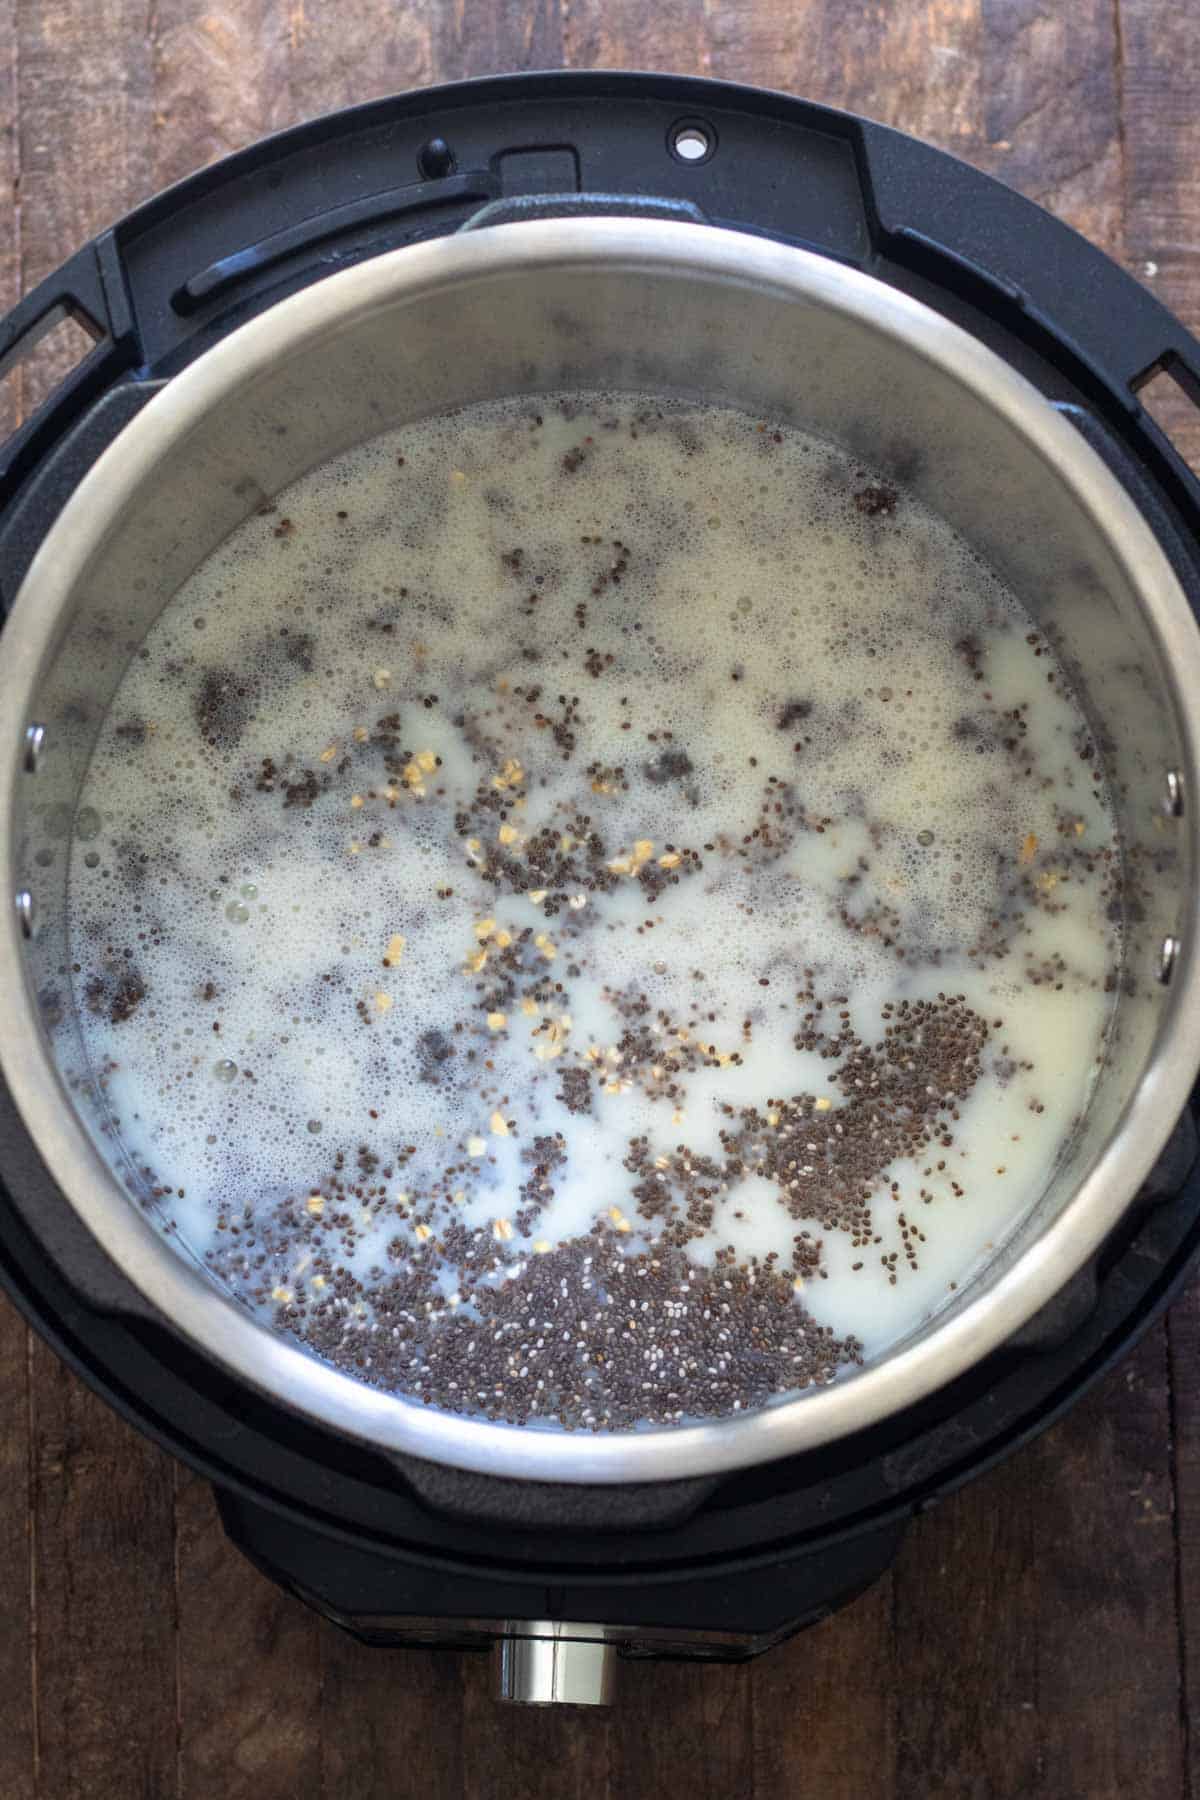 Oats added to milk mixture in Instant Pot.